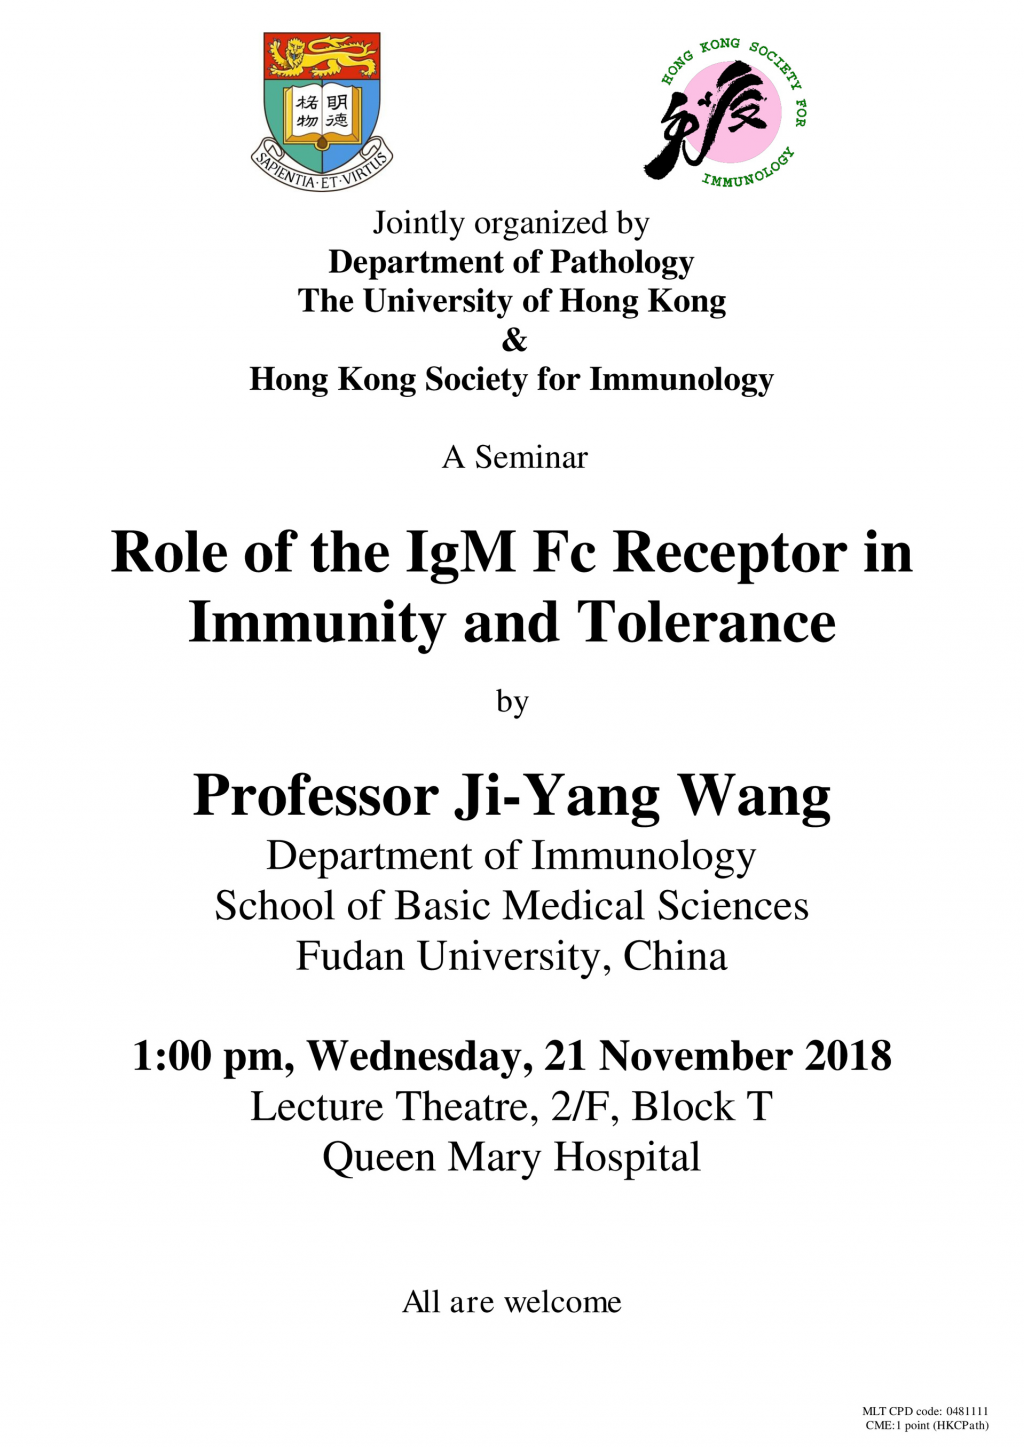 A Seminar on Role of the IgM Fc Receptor in Immunity and Tolerance